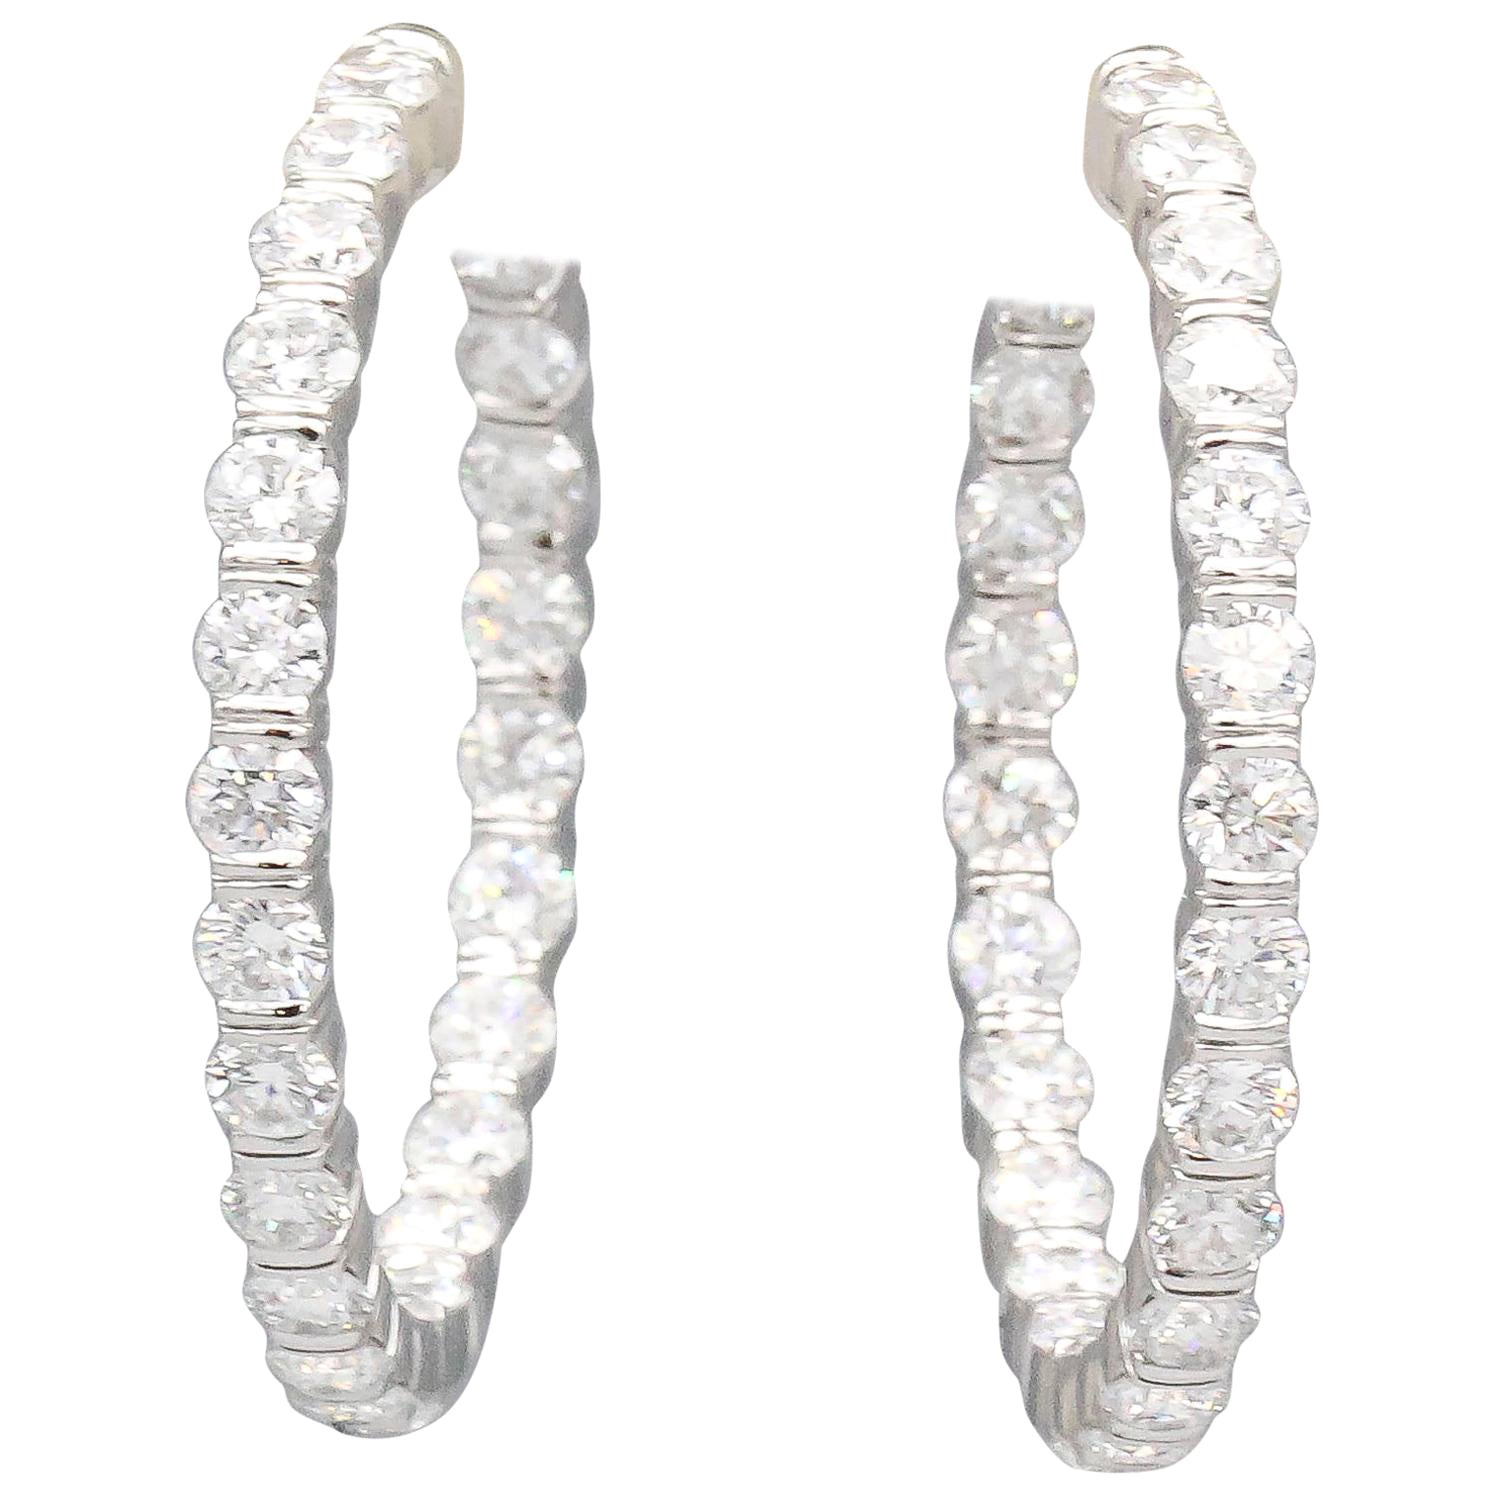 Harry Winston 8.17 Carat Diamond and Platinum Inside Out Hoops Earrings For Sale